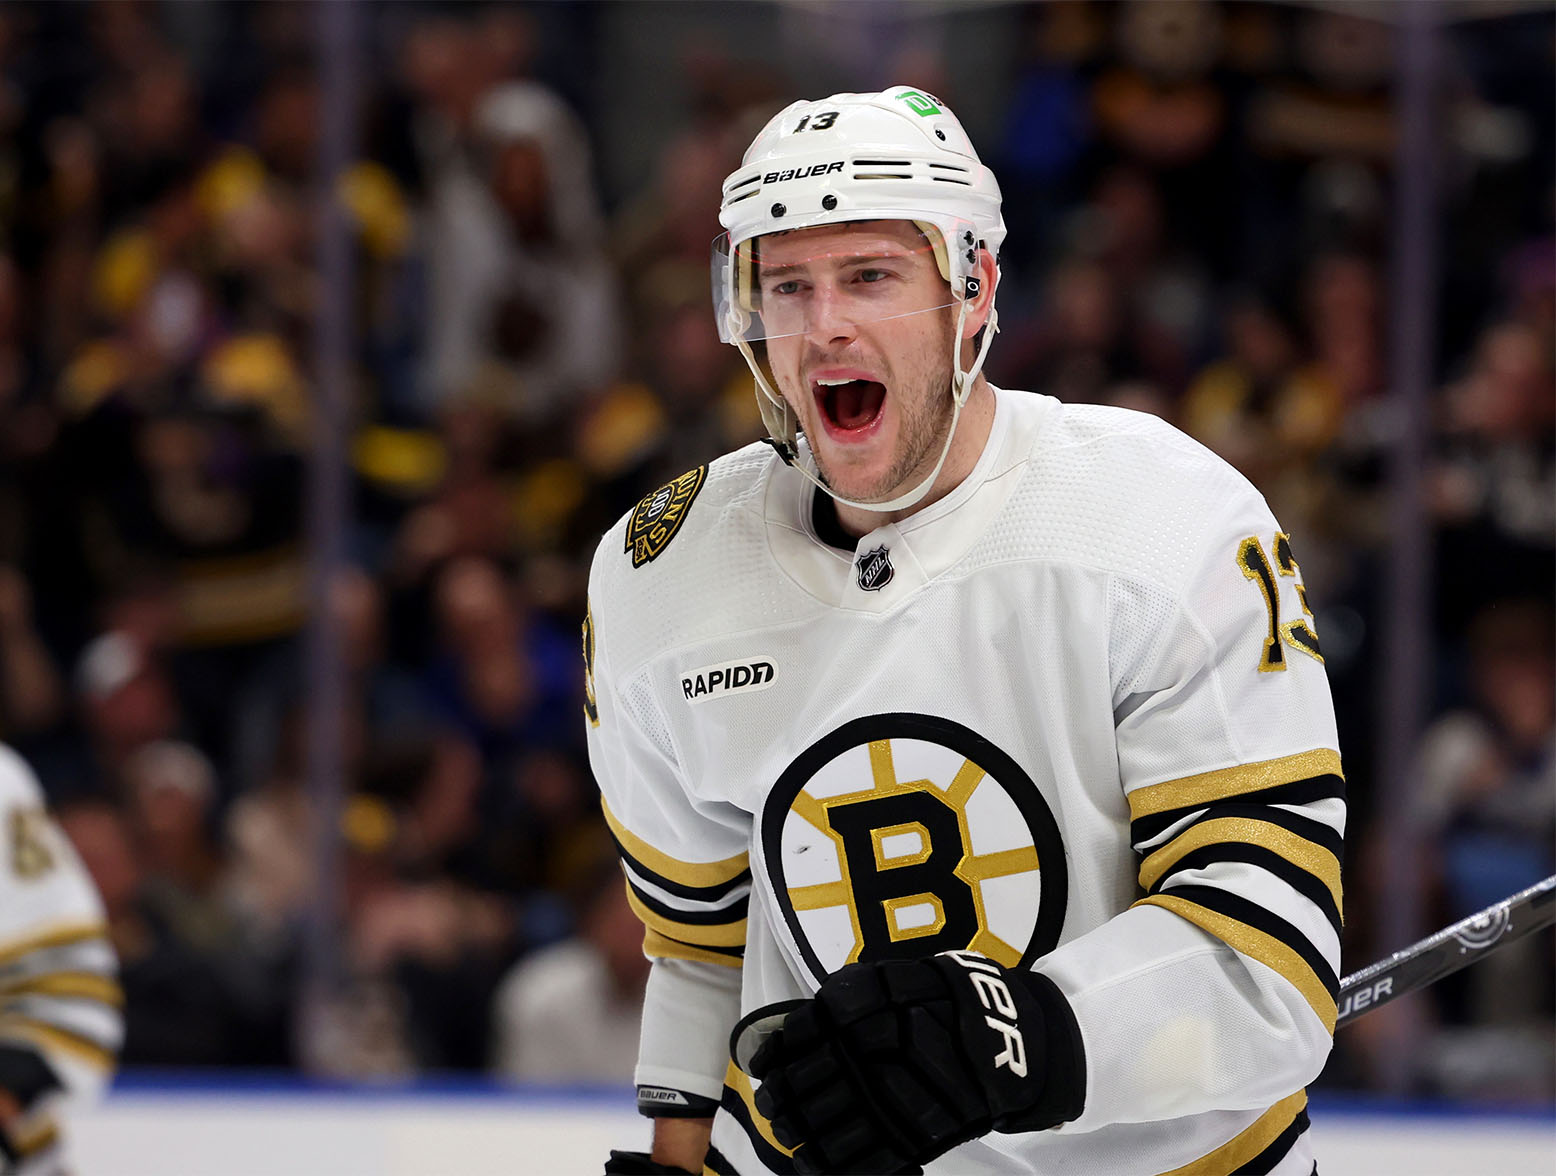 Dec 27, 2023; Buffalo, New York, USA; Boston Bruins center Charlie Coyle (13) reacts after scoring a goal during the first period against the Buffalo Sabres at KeyBank Center. Mandatory Credit: Timothy T. Ludwig-USA TODAY Sports